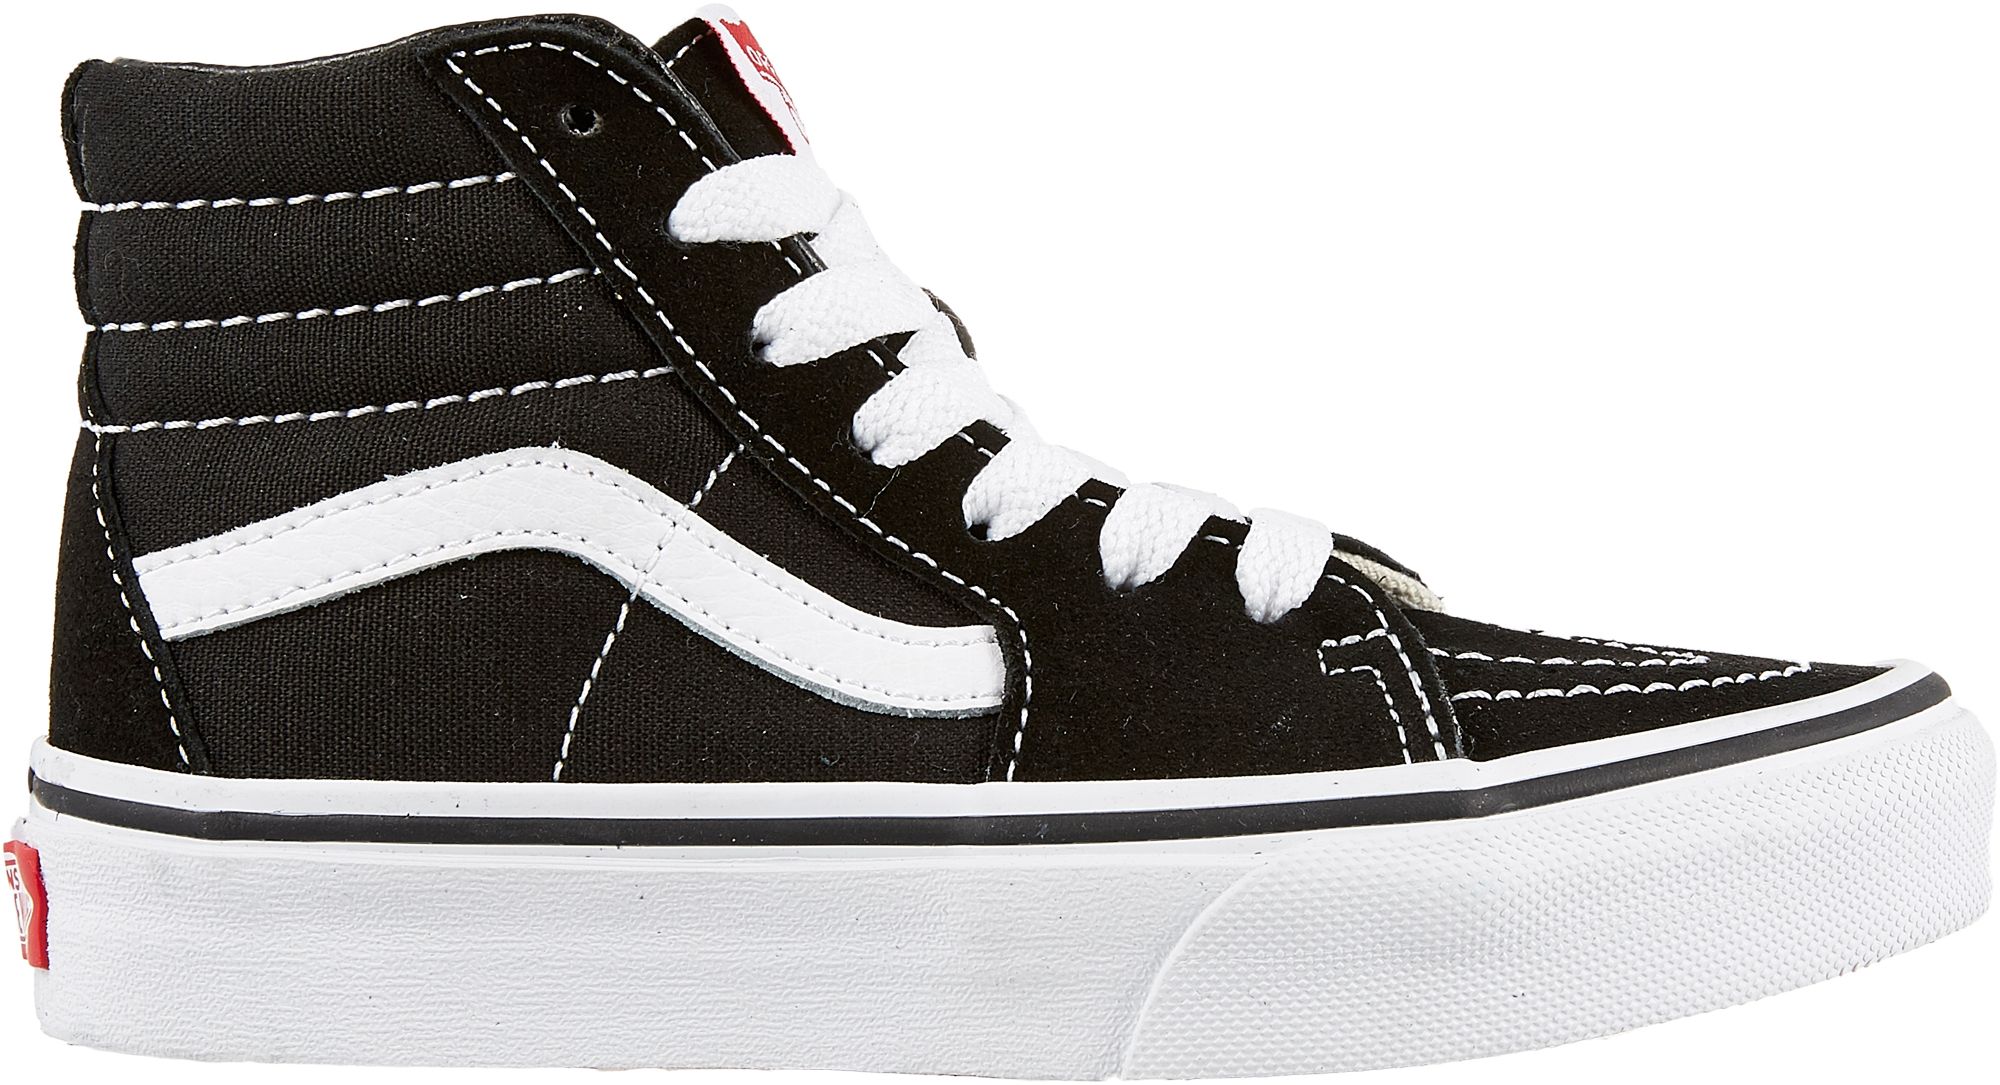 black and white high top vans